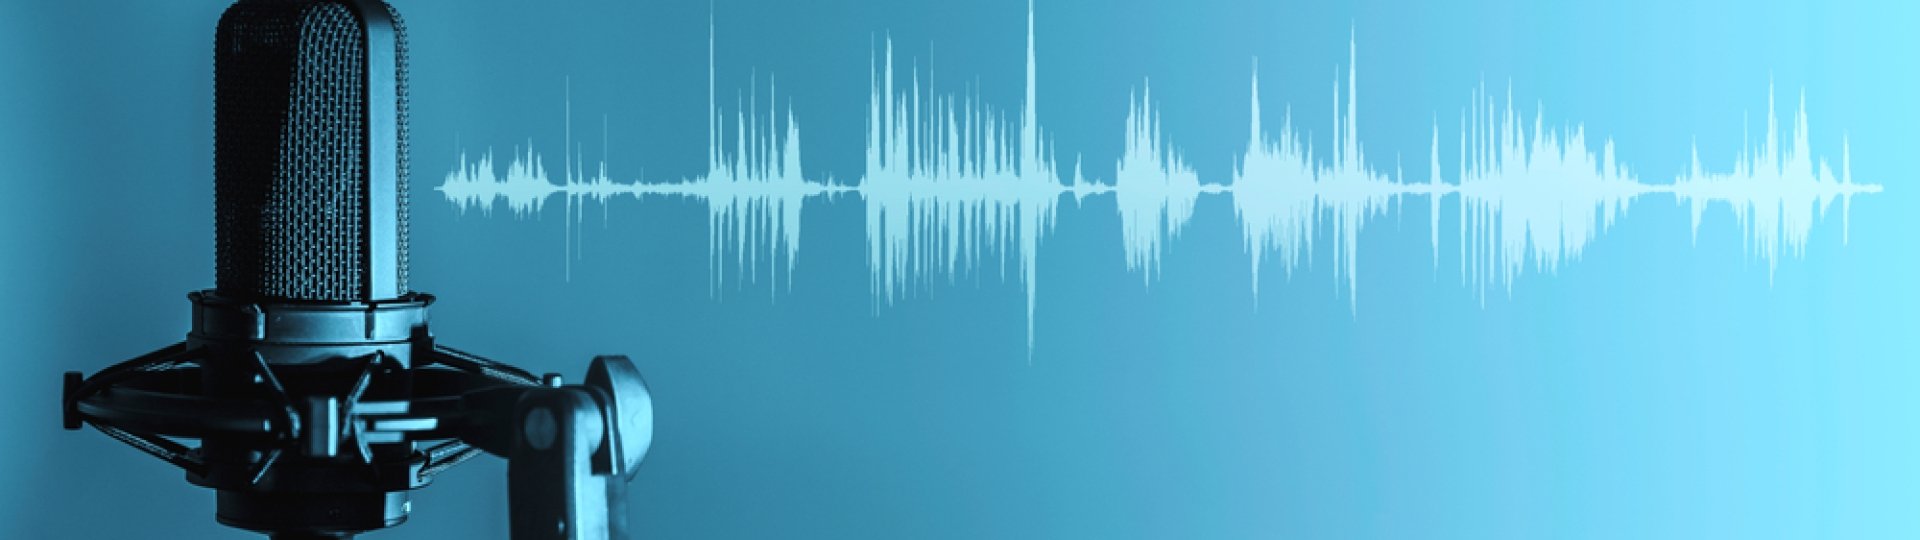 Microphone and Soundwaves